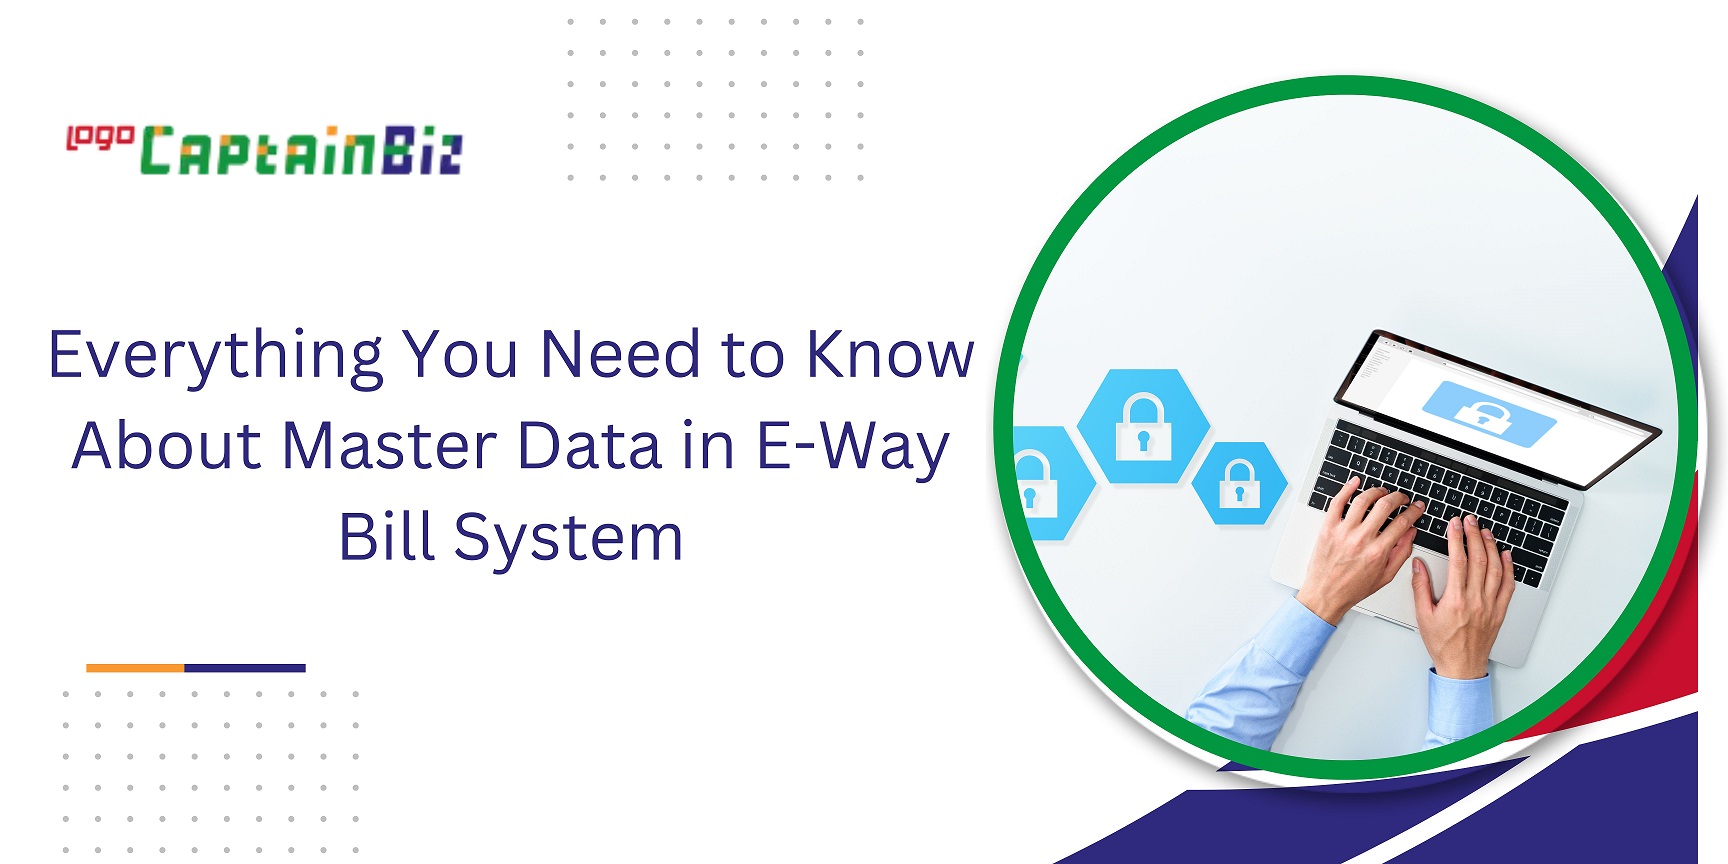 CaptainBiz: Everything You Need to Know About Master Data in E-Way Bill System